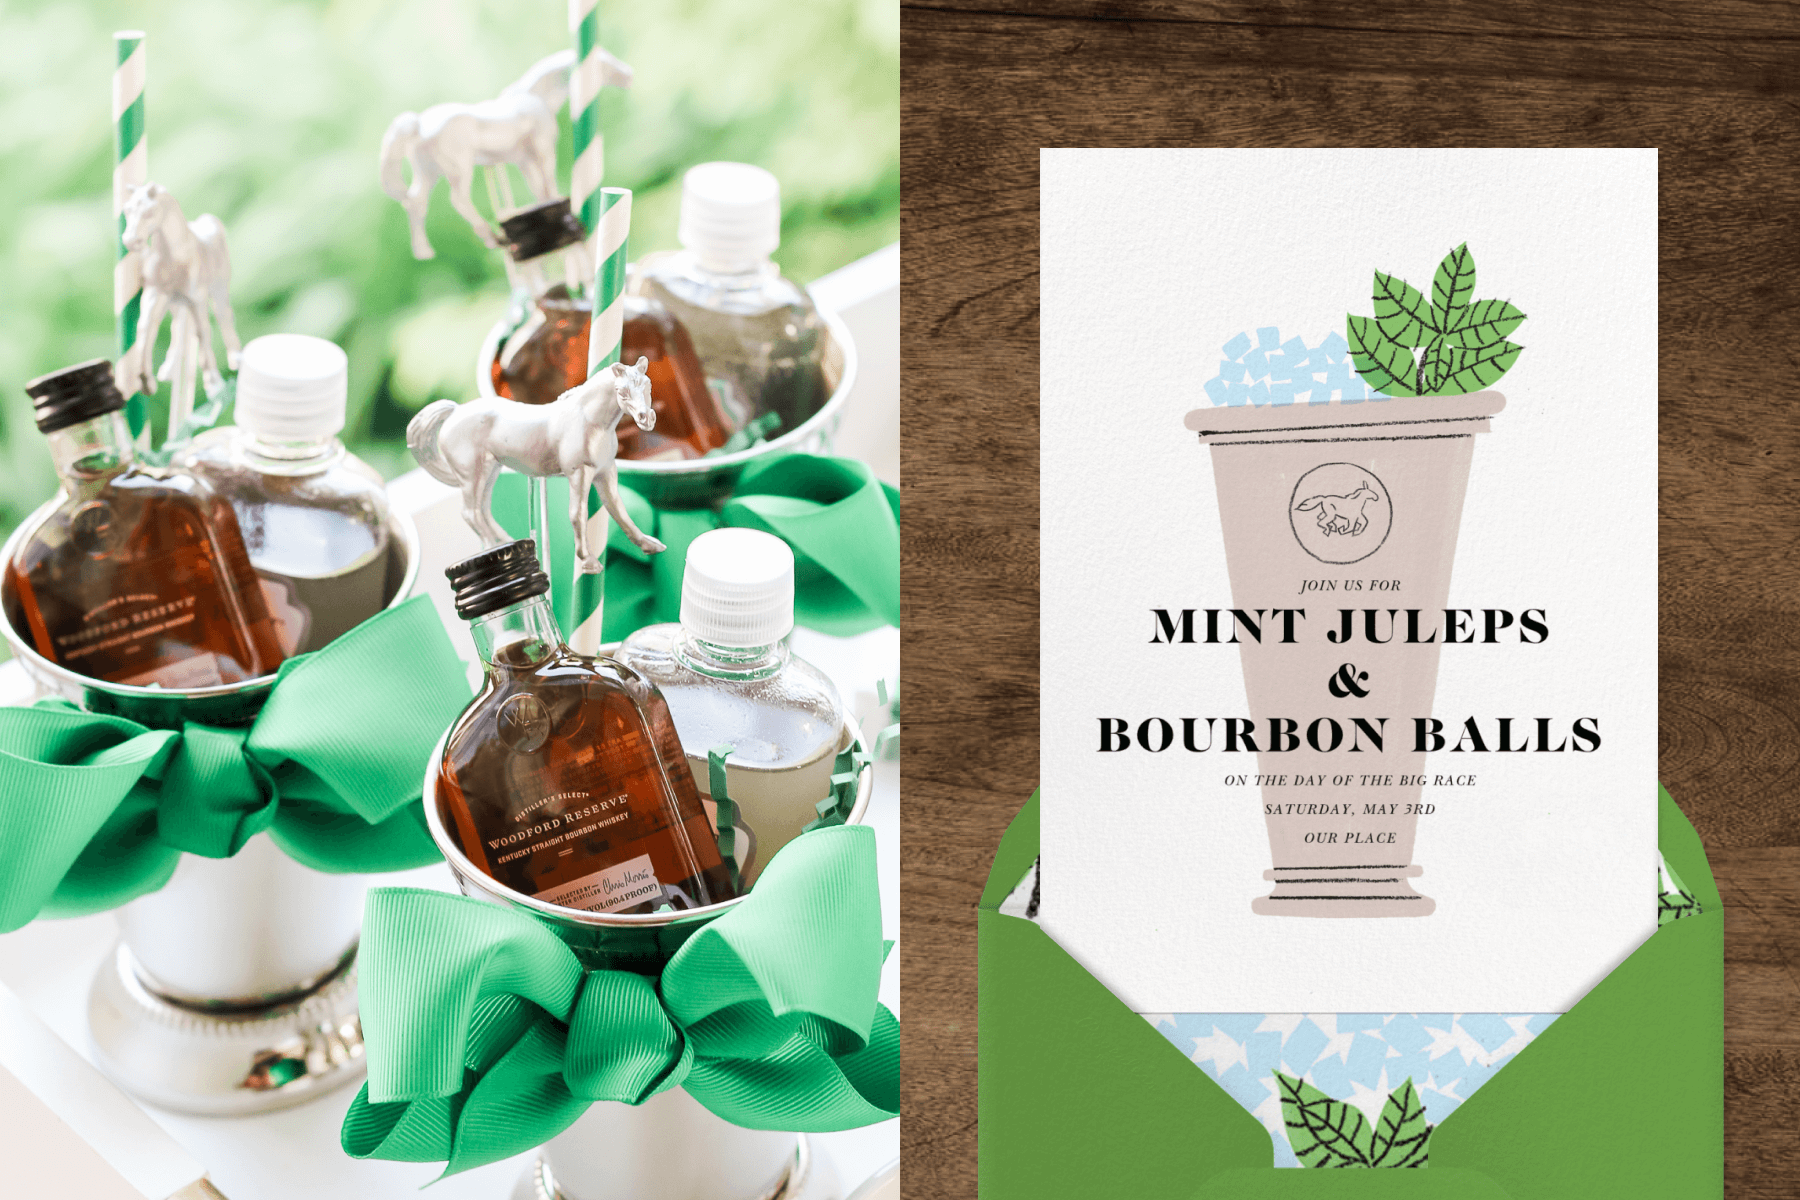 Left: Three DIY mint julep kits as party favors featuring silver cups with green grosgrain bows filled with small bourbon bottles, striped straws, a small horse figurine, and small bottles of mint syrup. Right: A white invitation with a silver mint julep cocktail glass illustration with a horse emblem on it emerging from a green envelope on a wood backdrop.